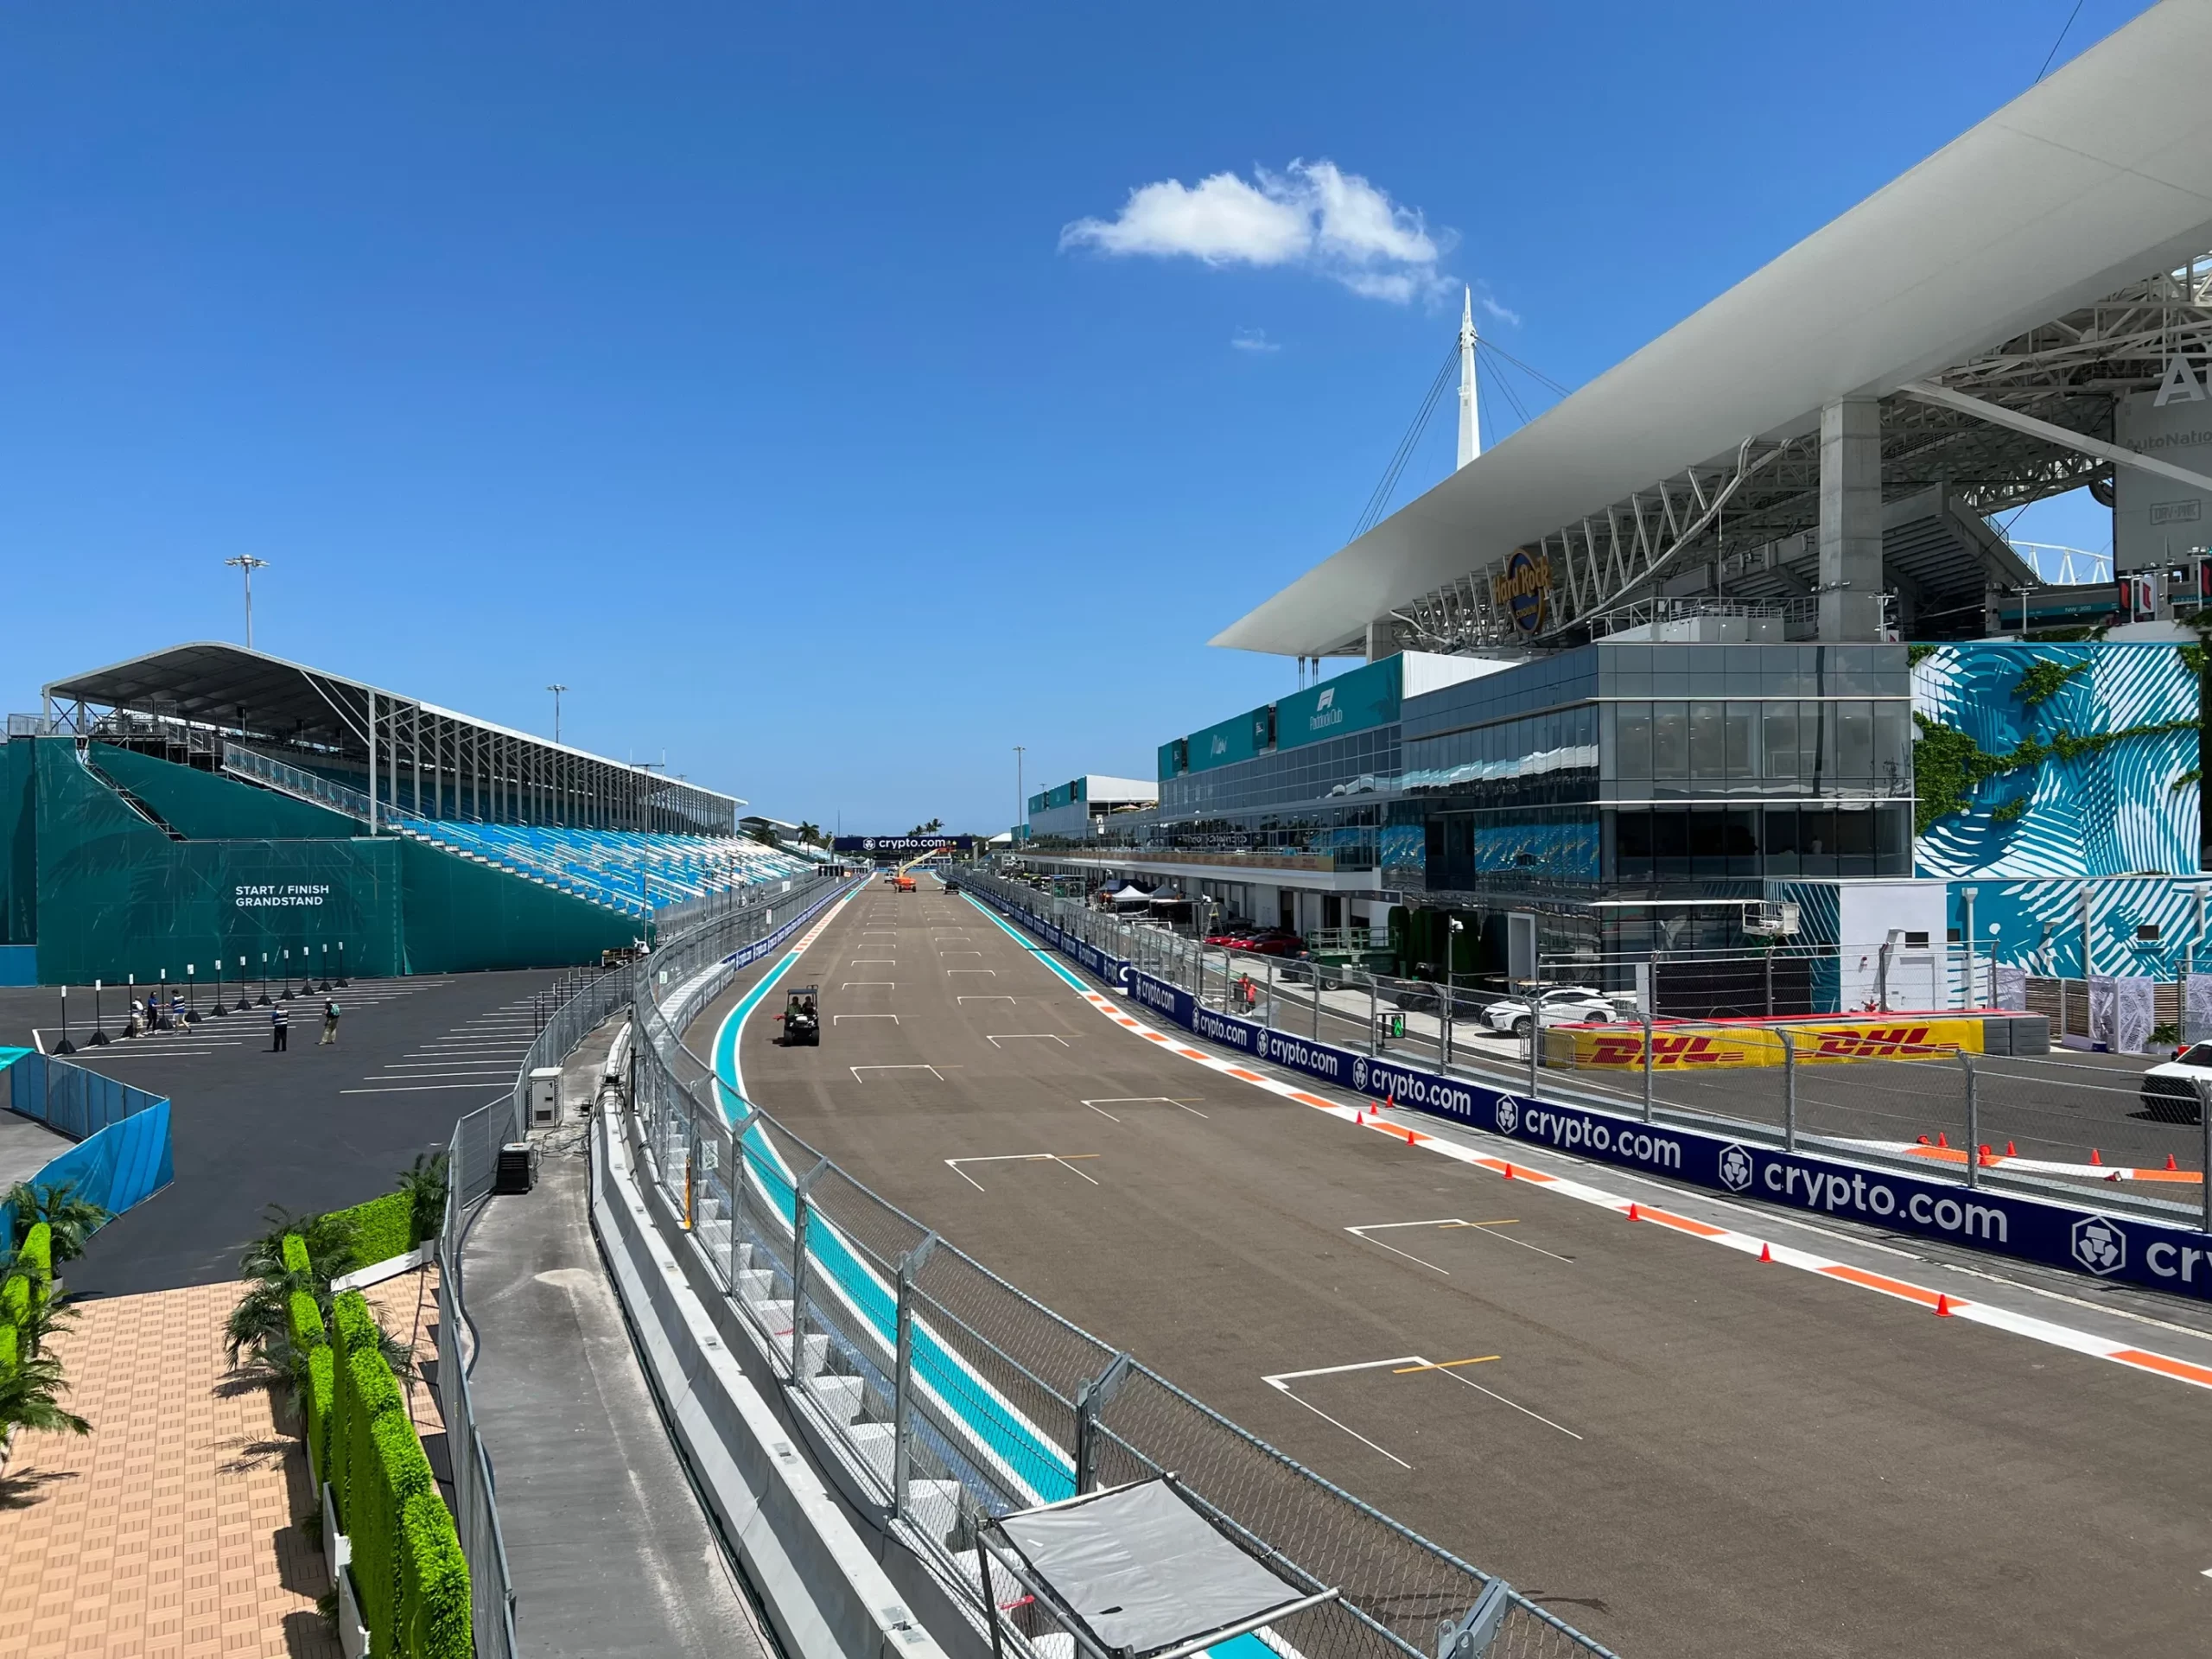 F1 Miami Grand Prix: everything you need to know